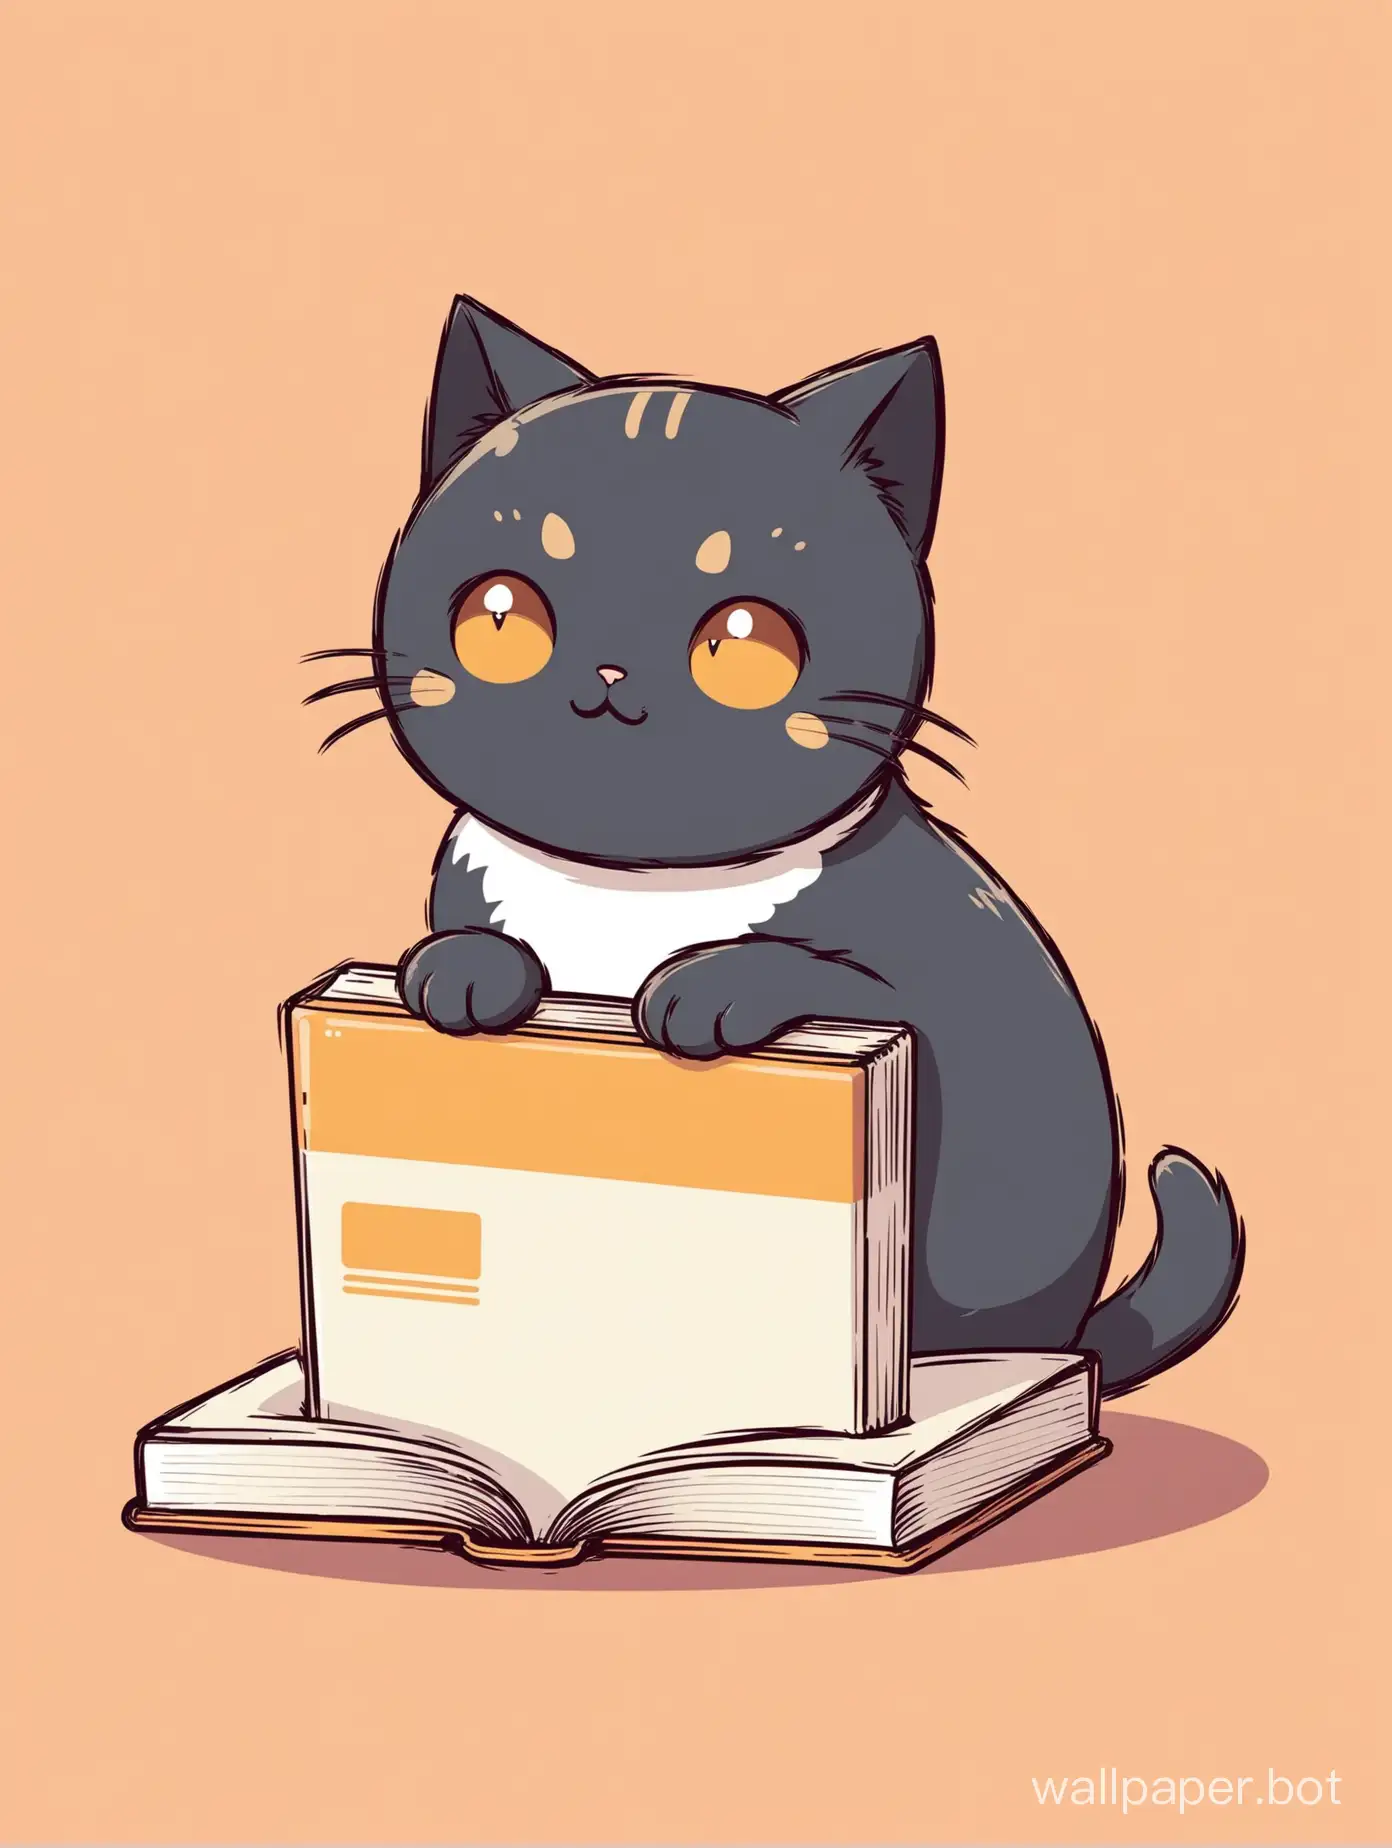 A cat holding a textbook flat illustration style